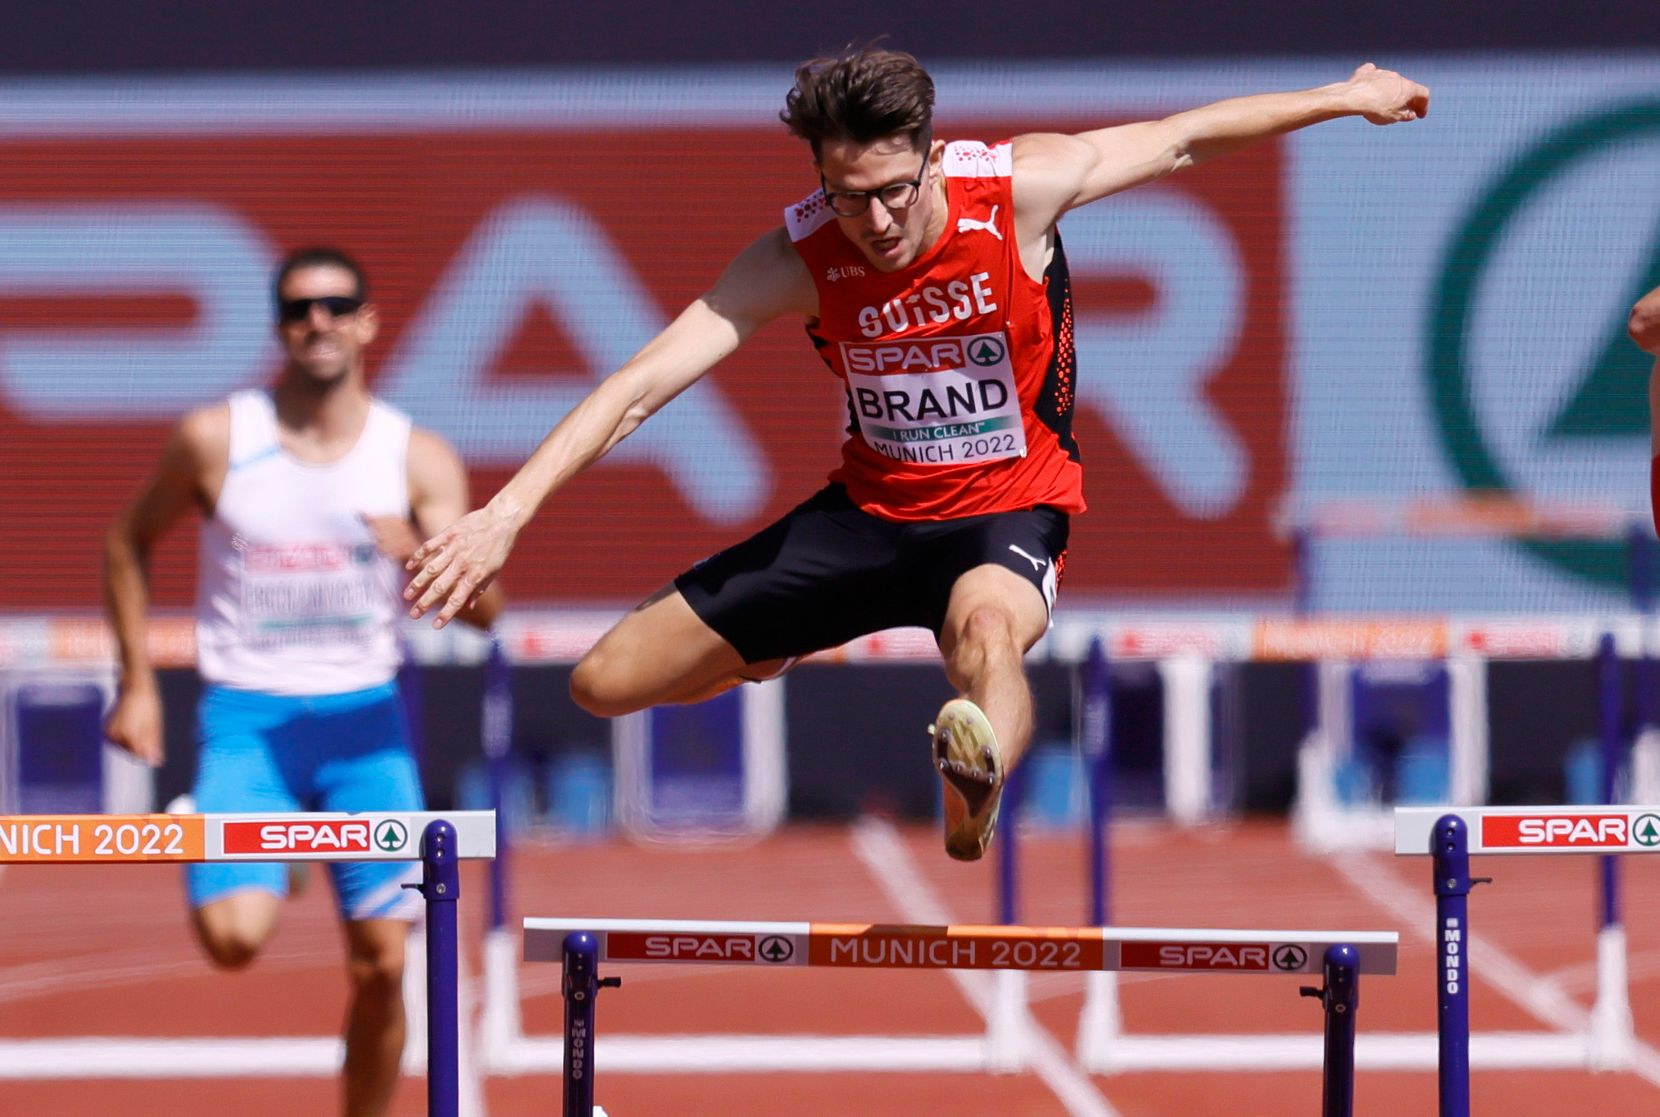 epa10125359 Dany Brand of Switzerland clears the hurdles of the mens 400m Hurdles during the Athletics events at the European Championships Munich 2022, Munich, Germany, 17 August 2022.  EPA/RONALD WITTEK